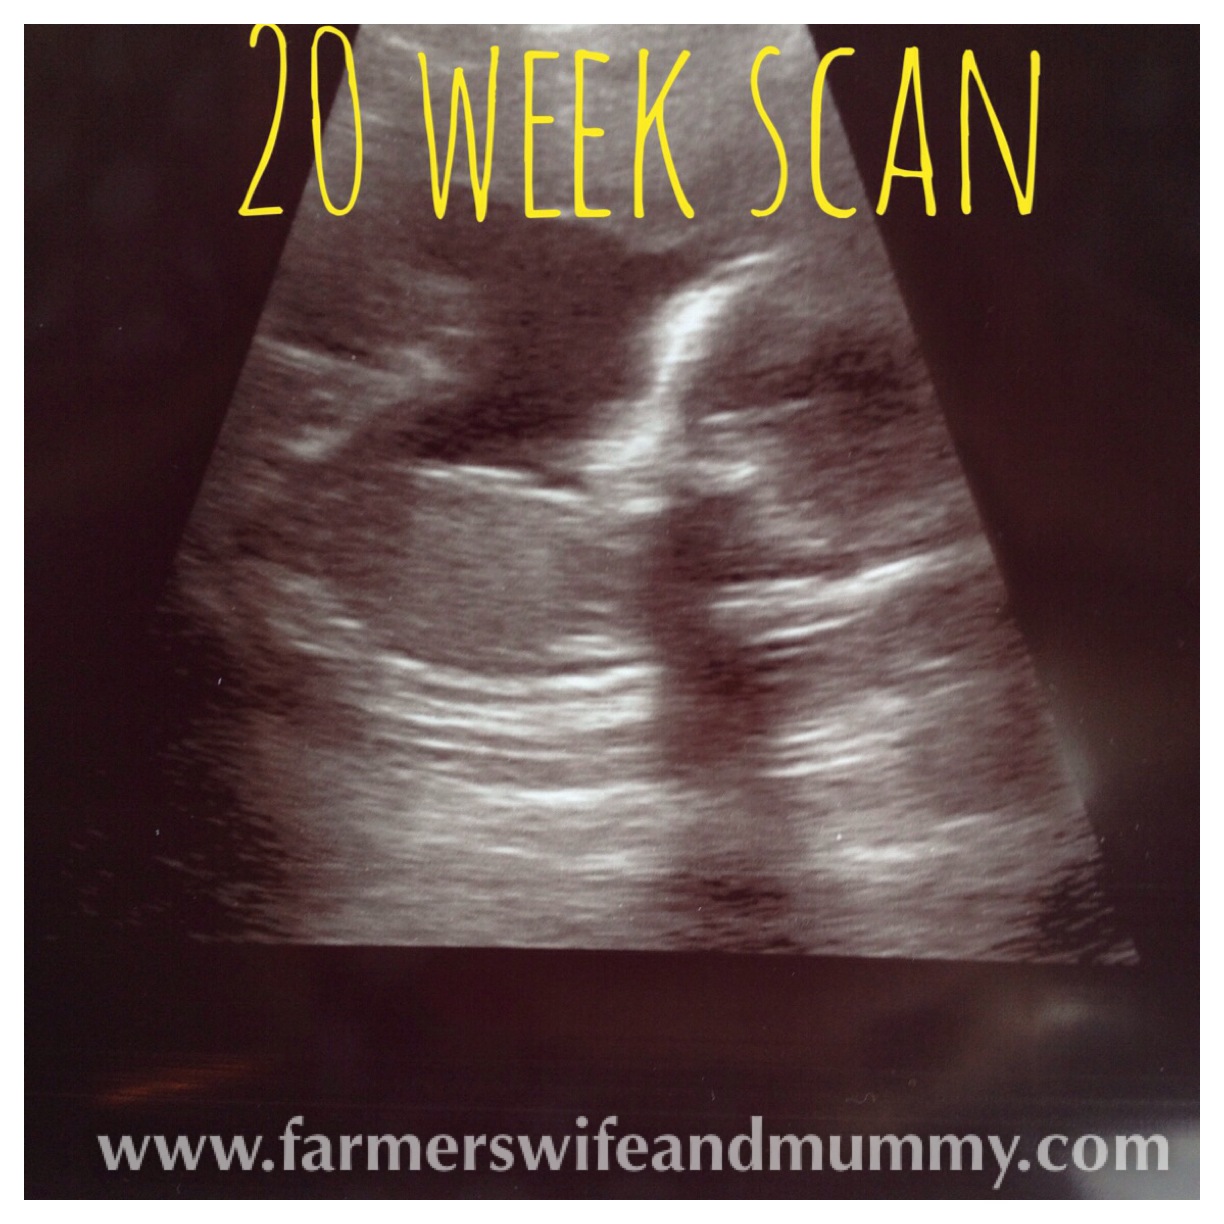 The 20-week scan-what are we having?